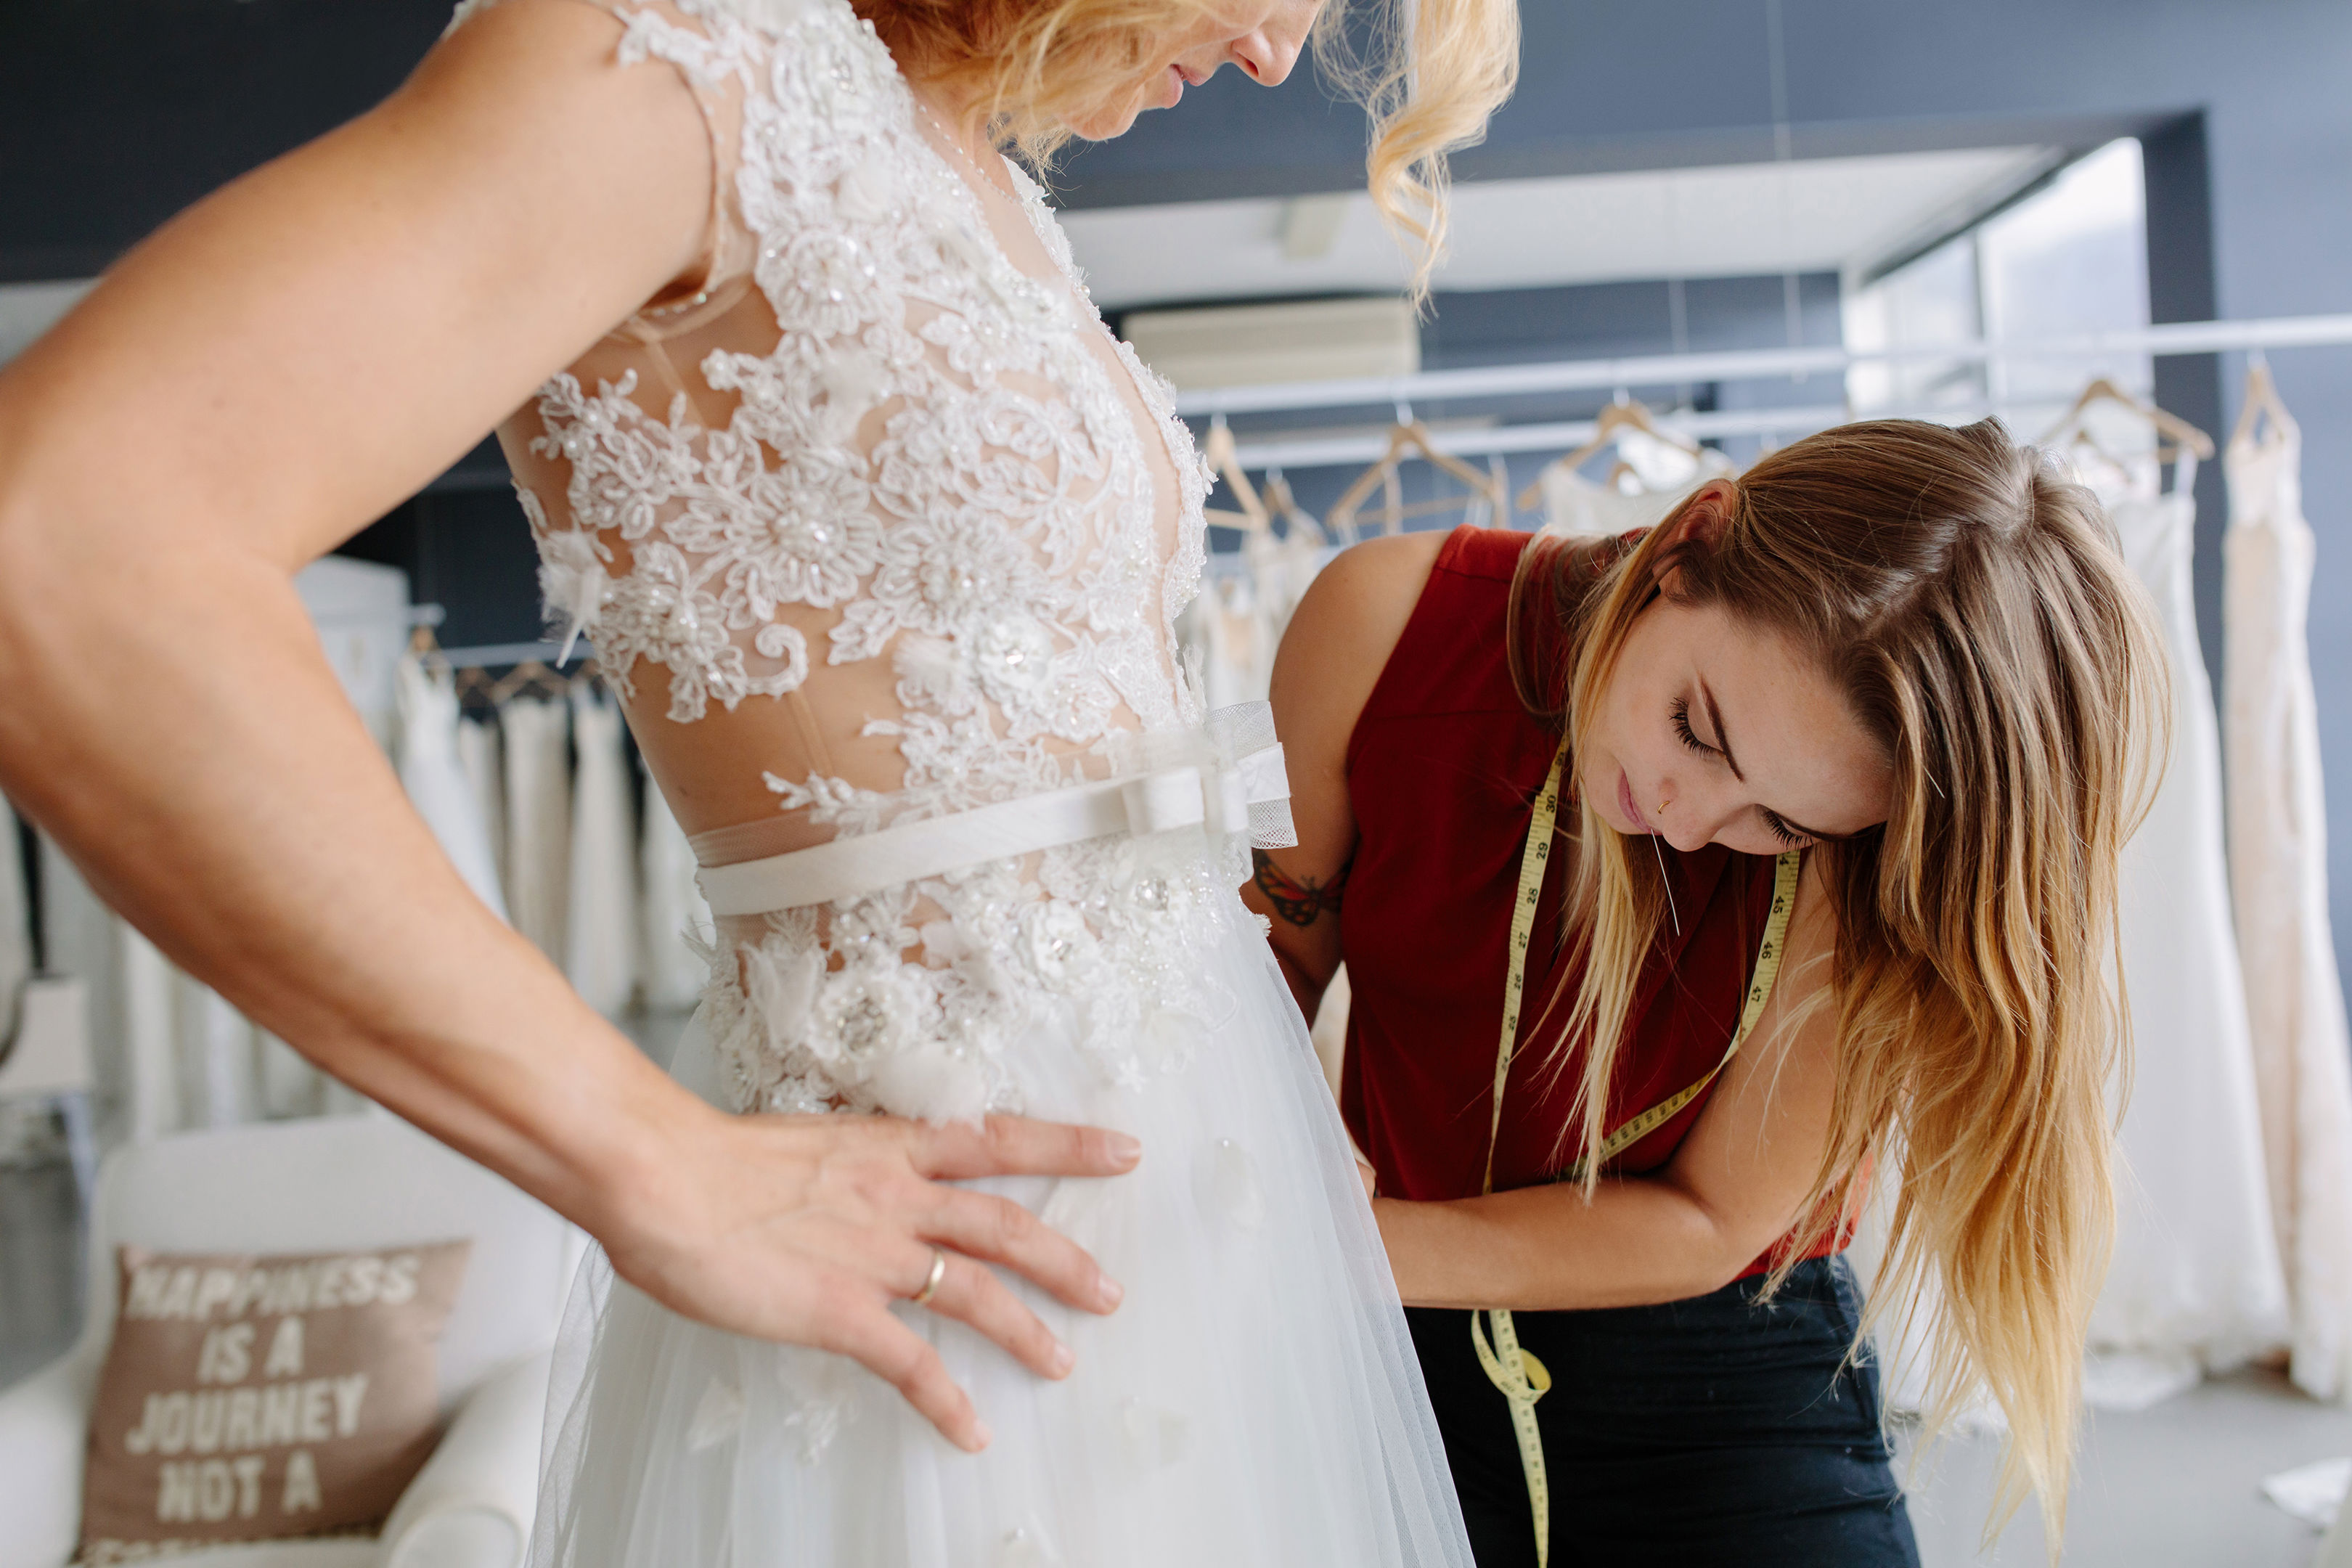 Dress Designer Fitting Wedding Gown To Woman